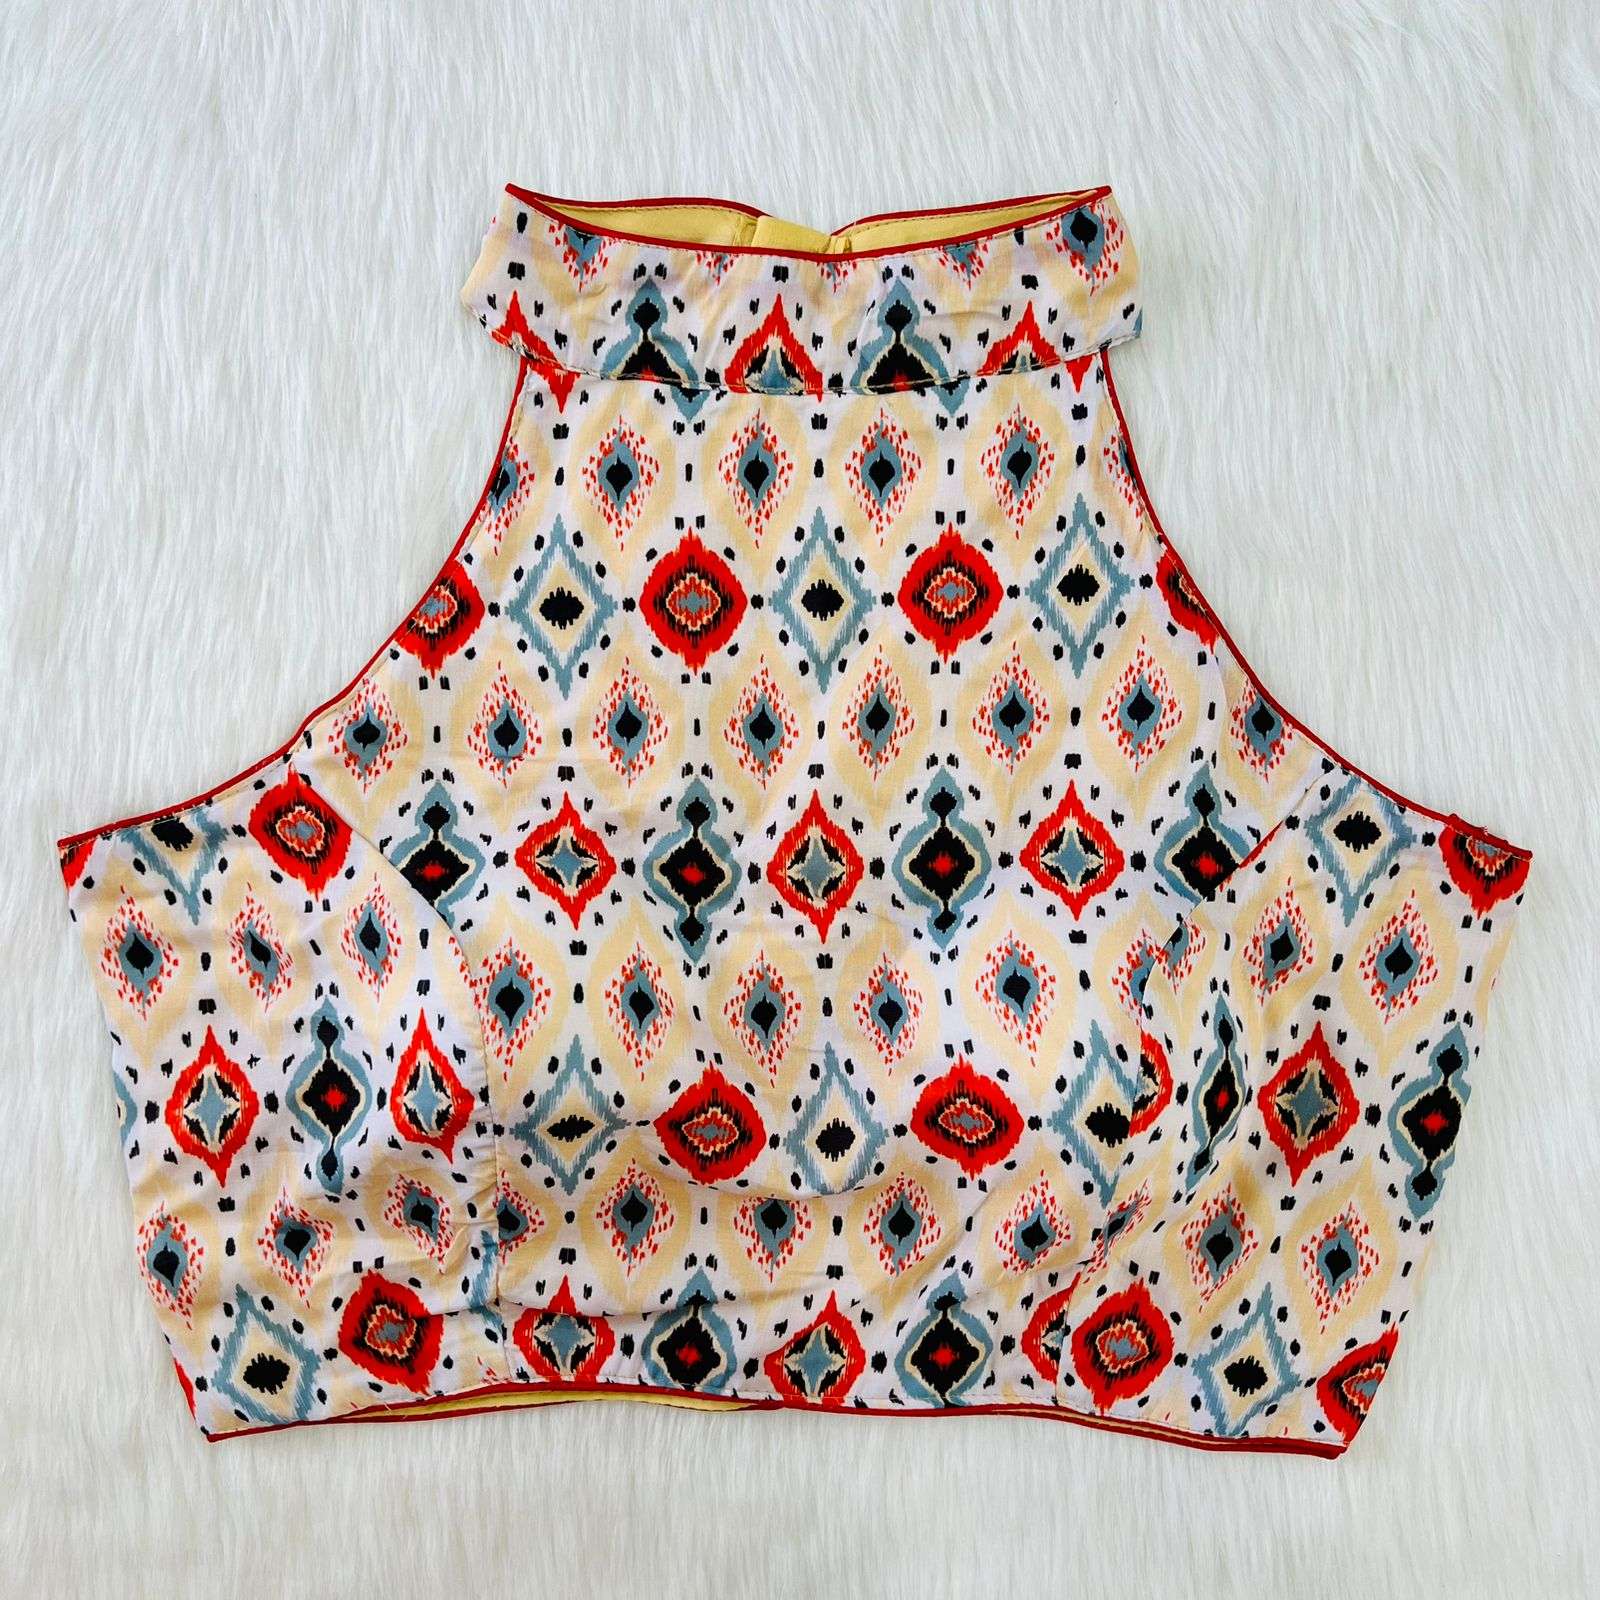 HALTER NECK BLOUSE LATEST PRINTED READY MADE BLOUSE COLLECTI...